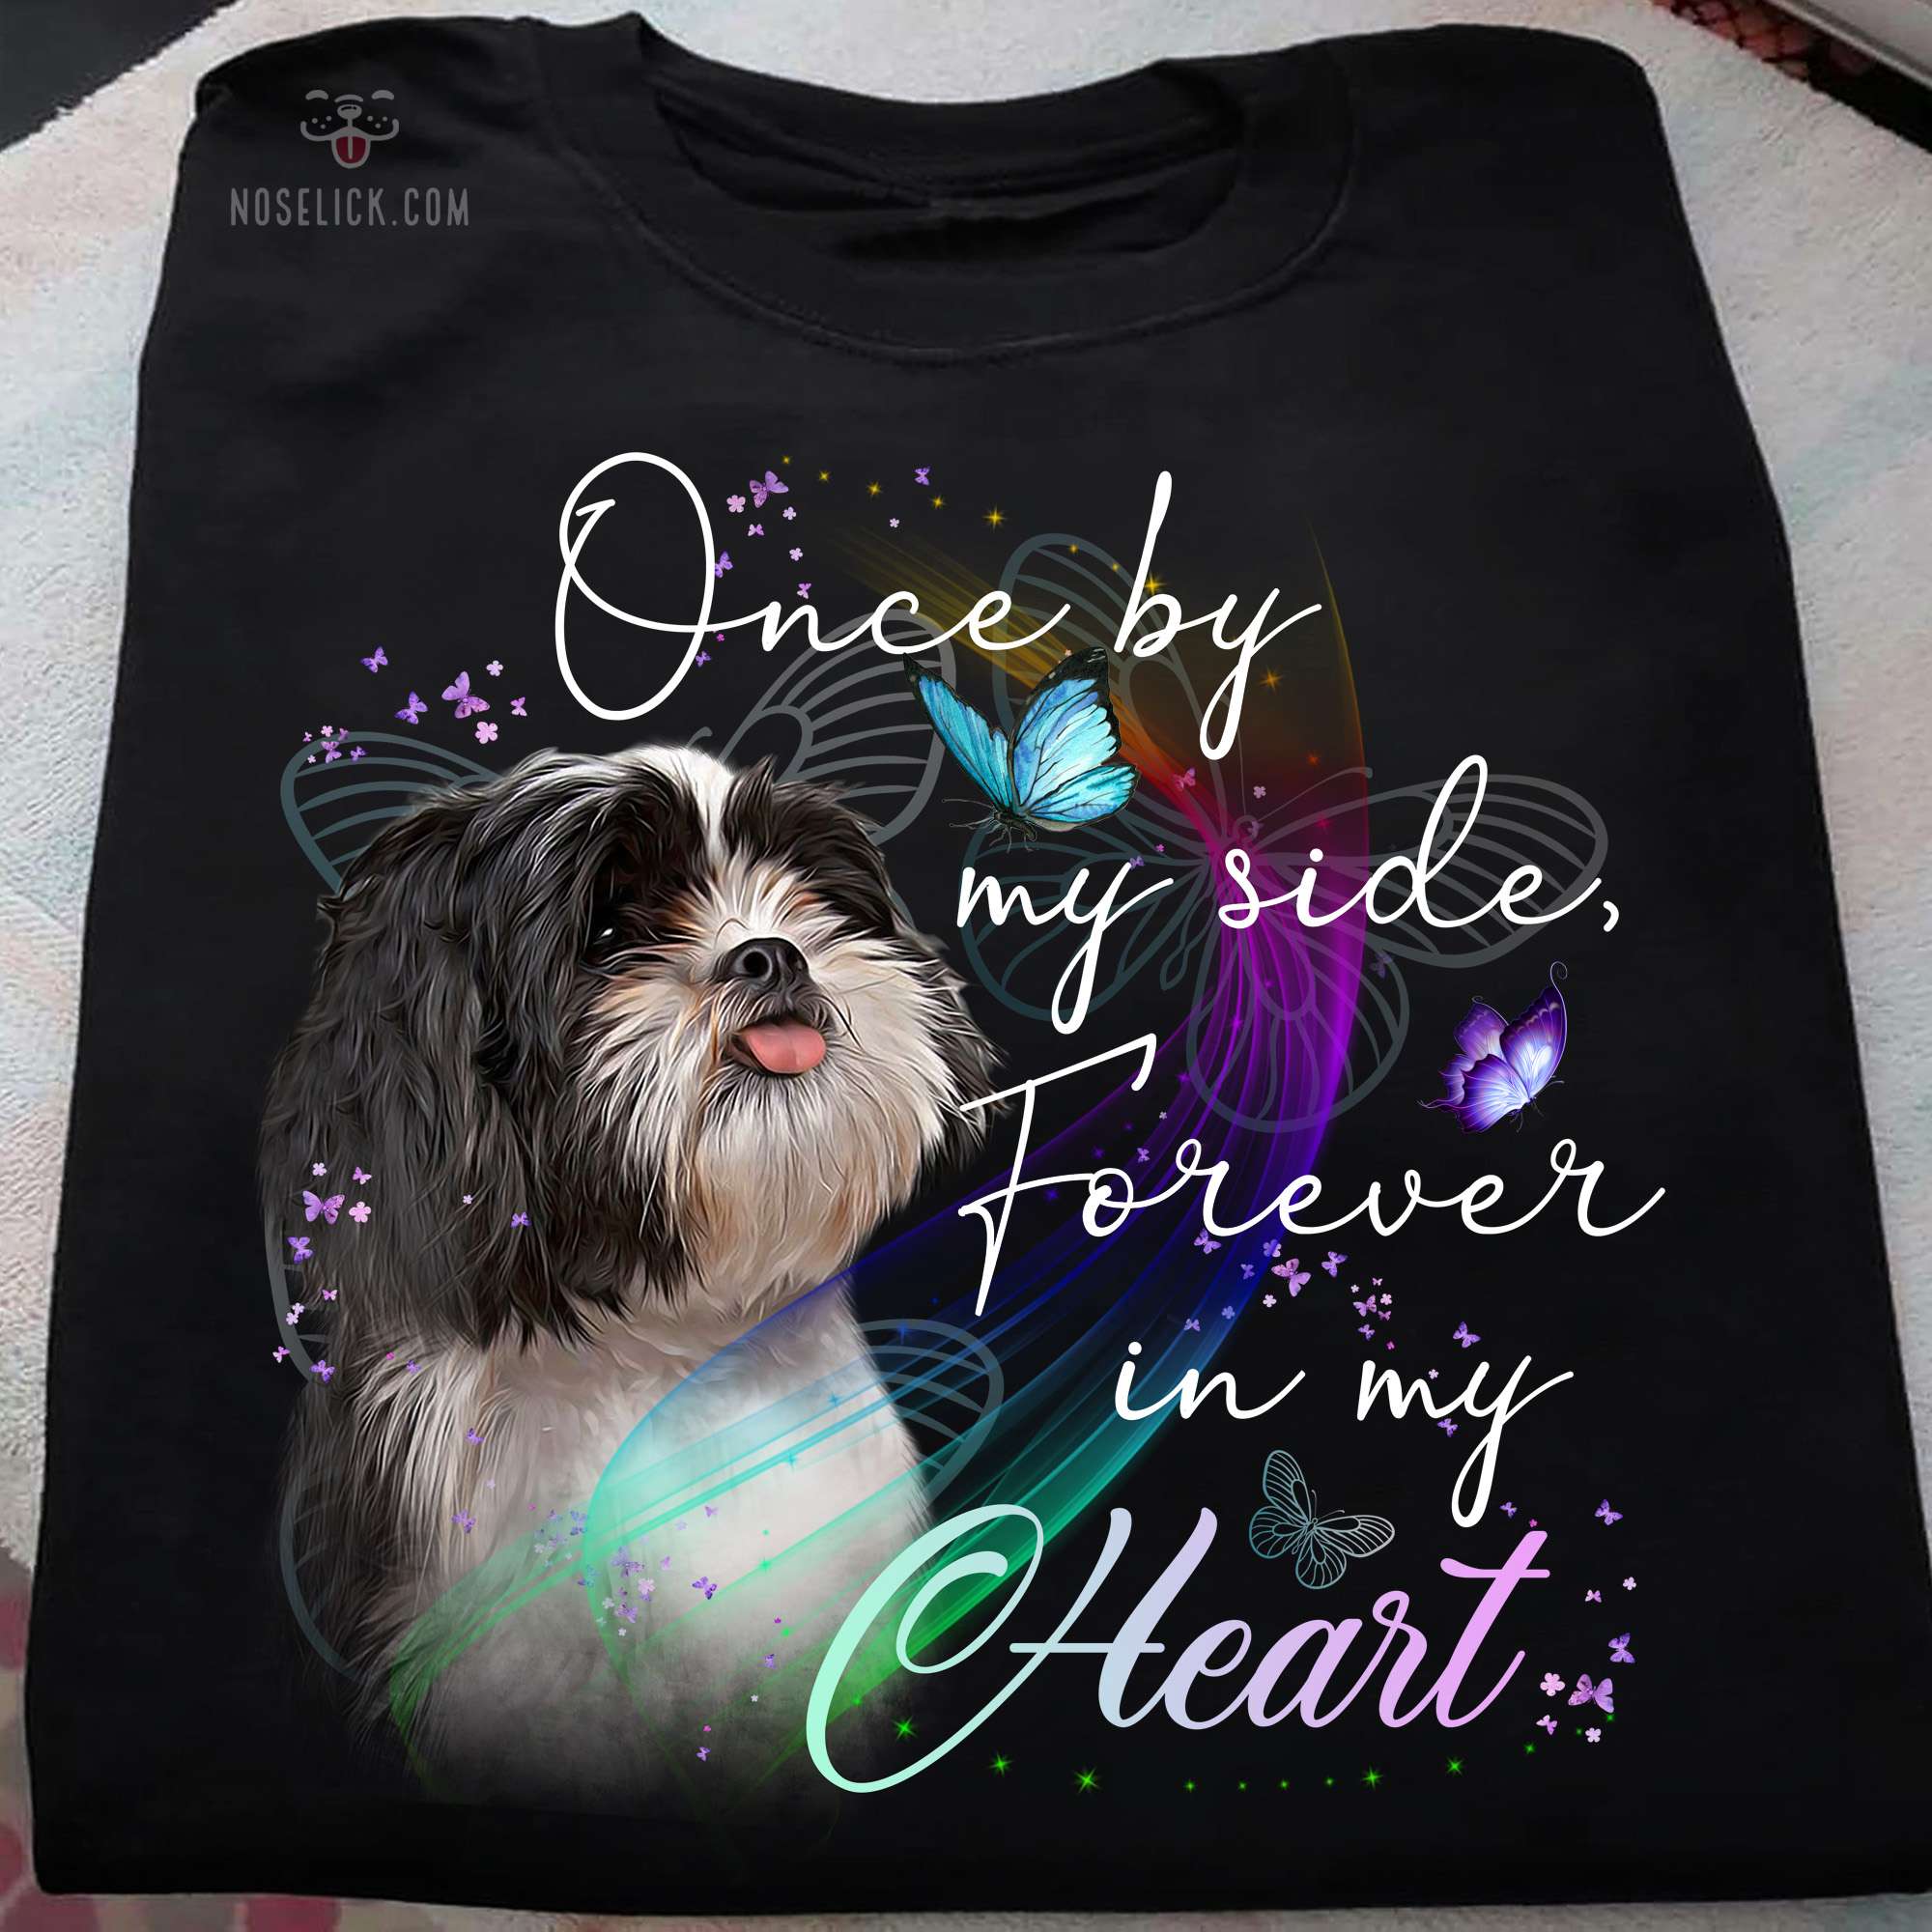 Once by my side, forever in my heart - Shih Tzu and butterflies, Shih Tzu heart